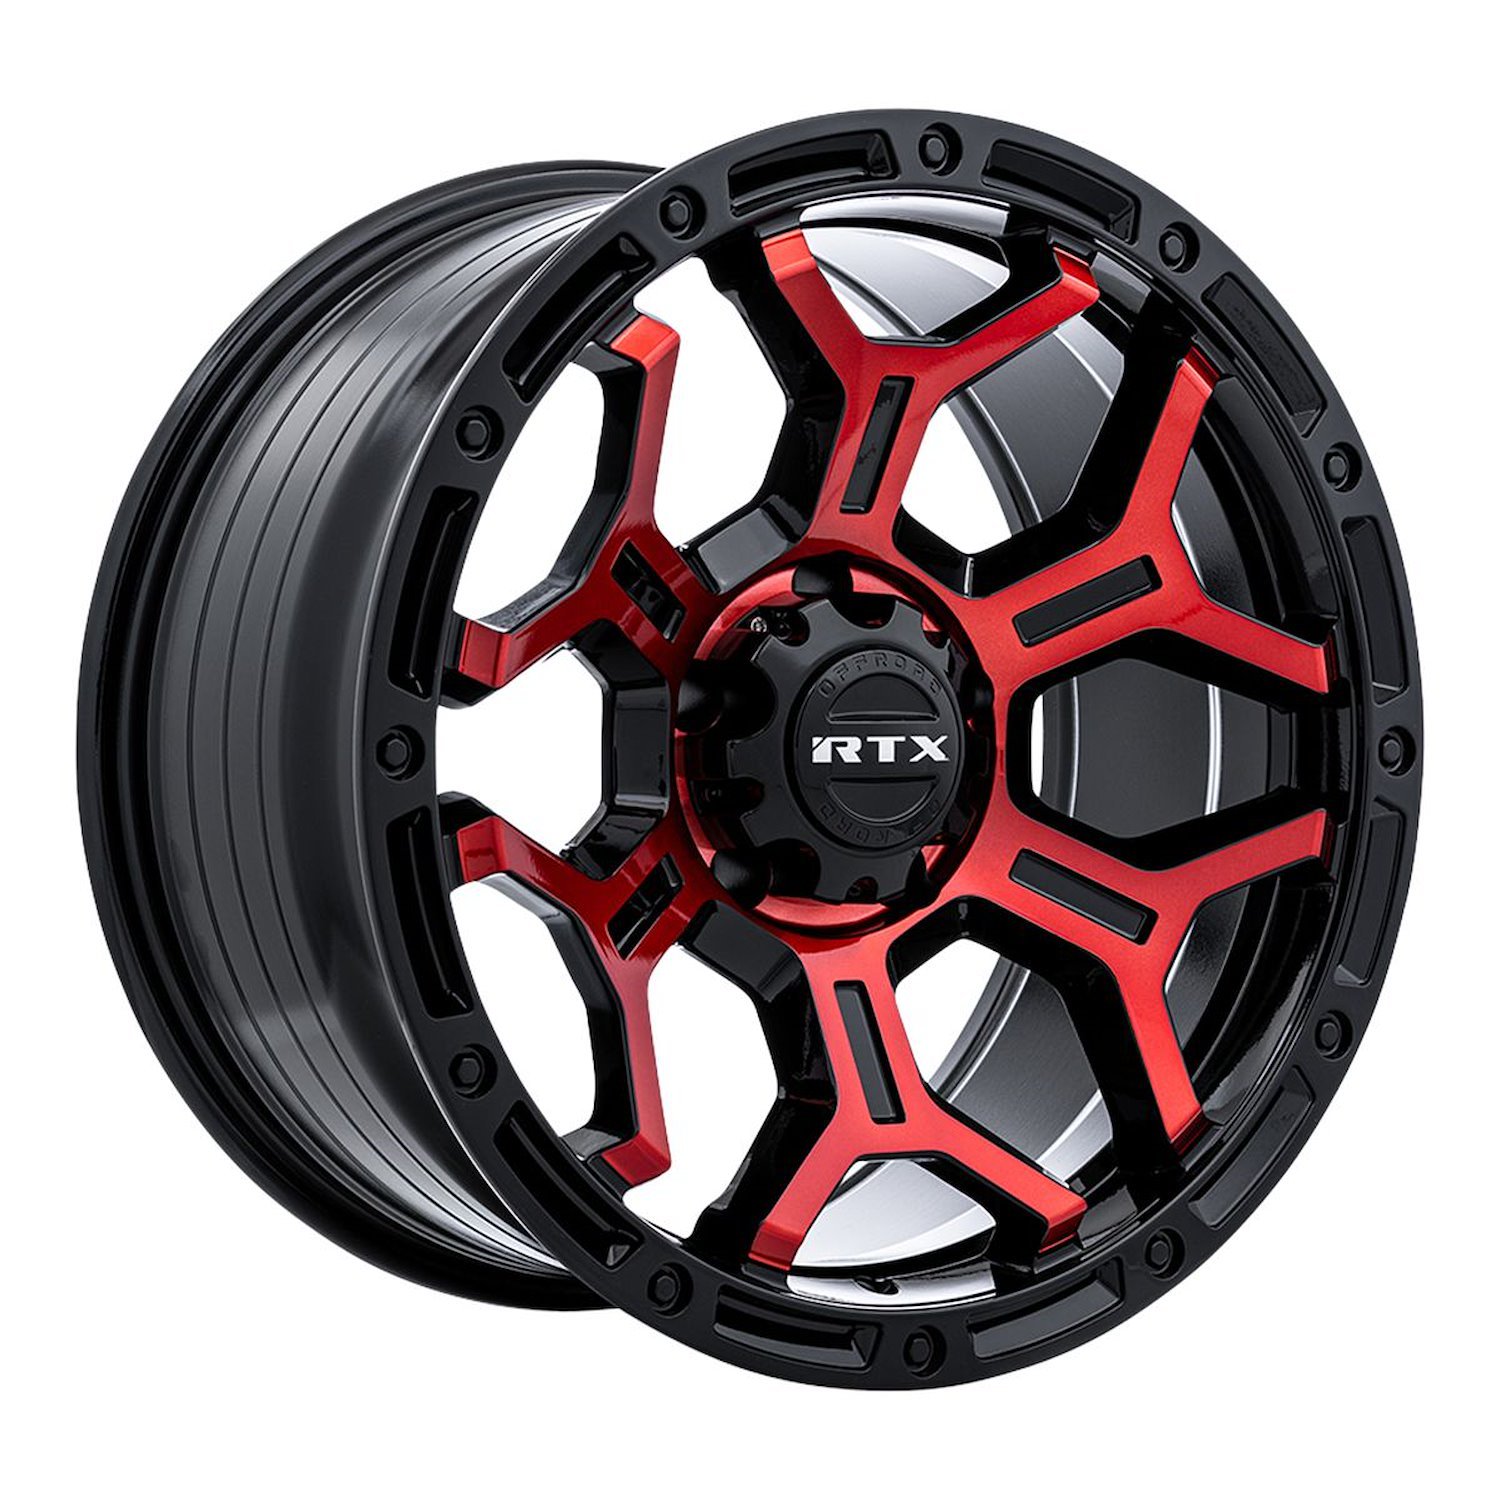 083104 Off-Road Series Goliath Wheel [Size: 18" x 9"] Gloss Black Machined Red Spokes Finish